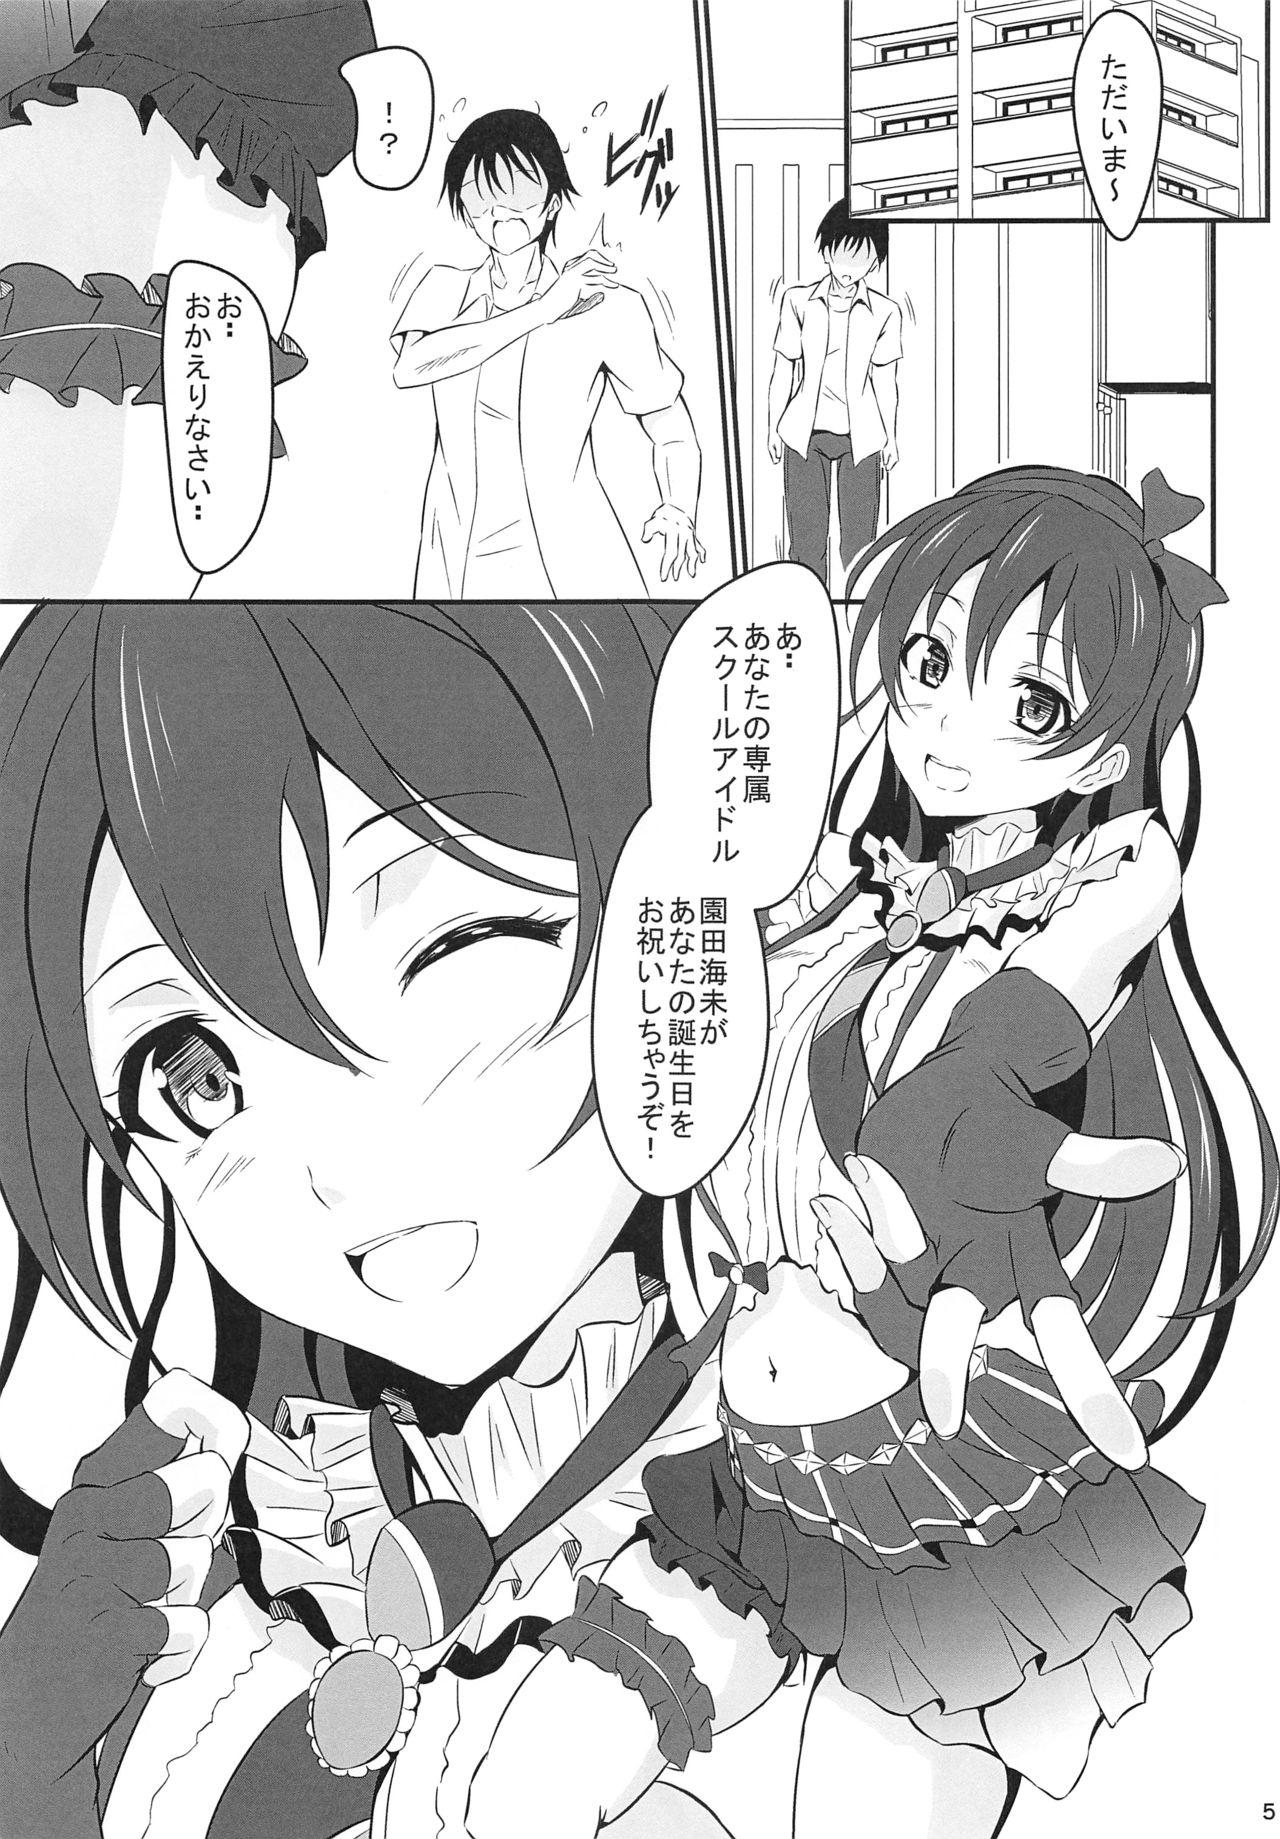 Whipping Umi LOVER - Love live Blackmail - Page 4